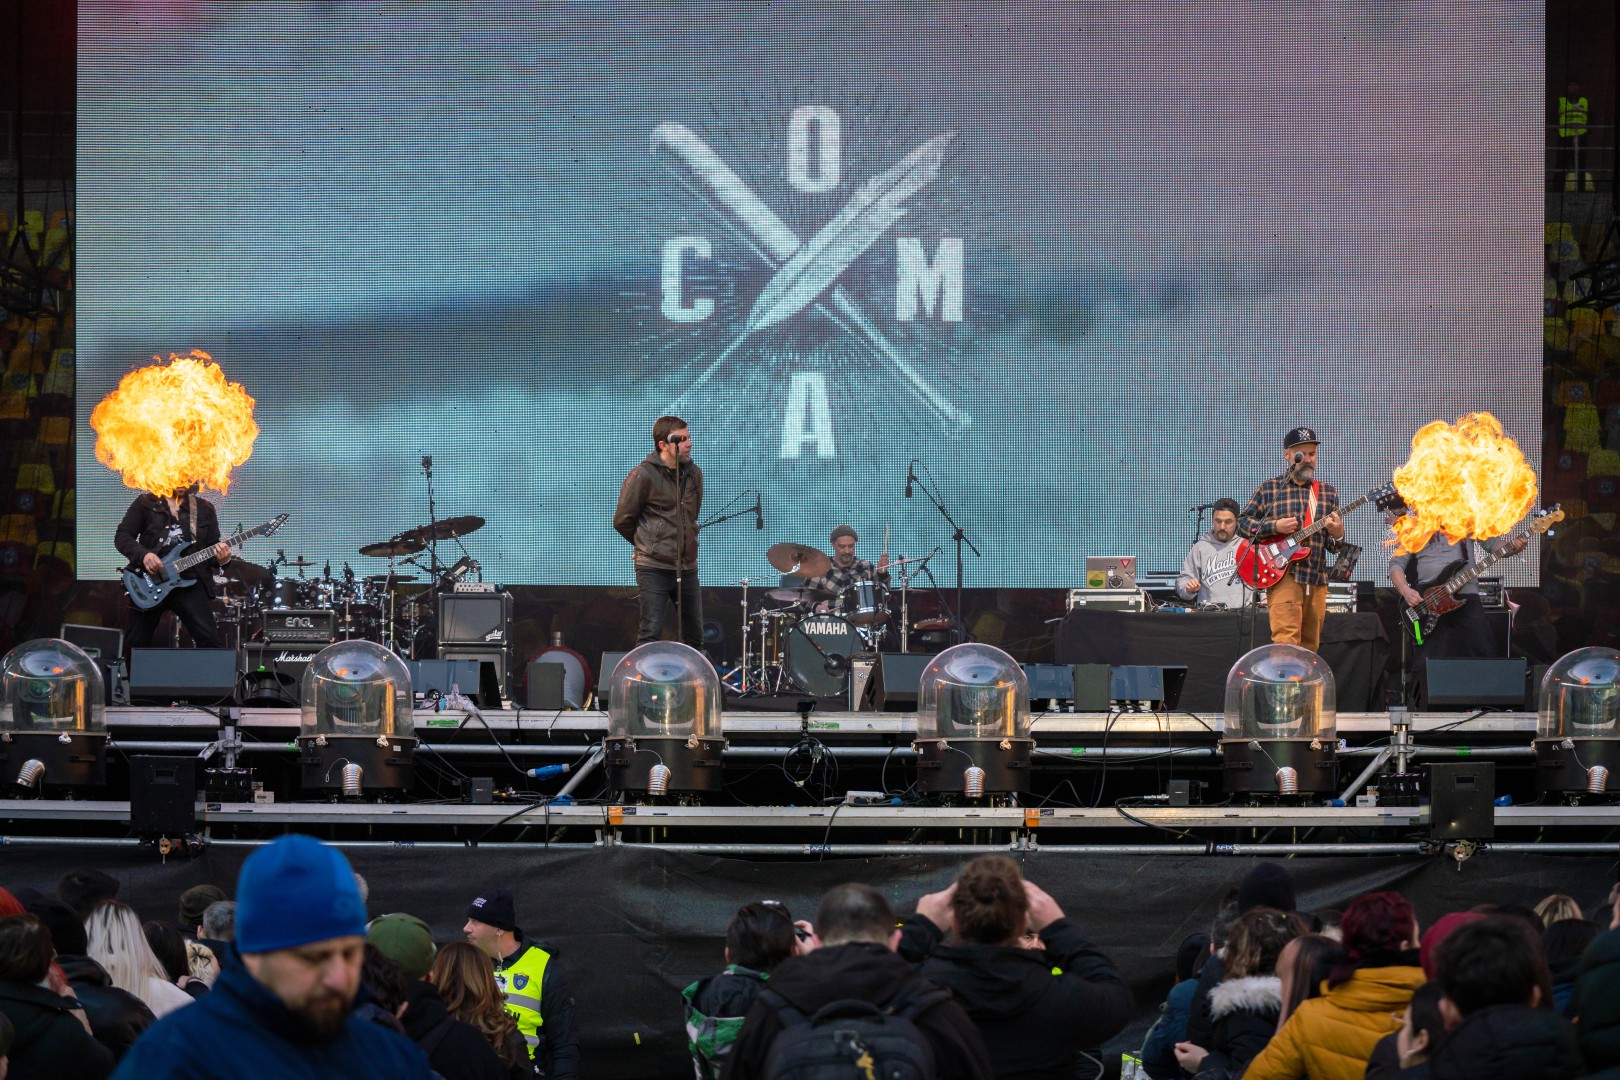 Coma at National Arena in Bucharest on March 12, 2022 (971e35a9d8)